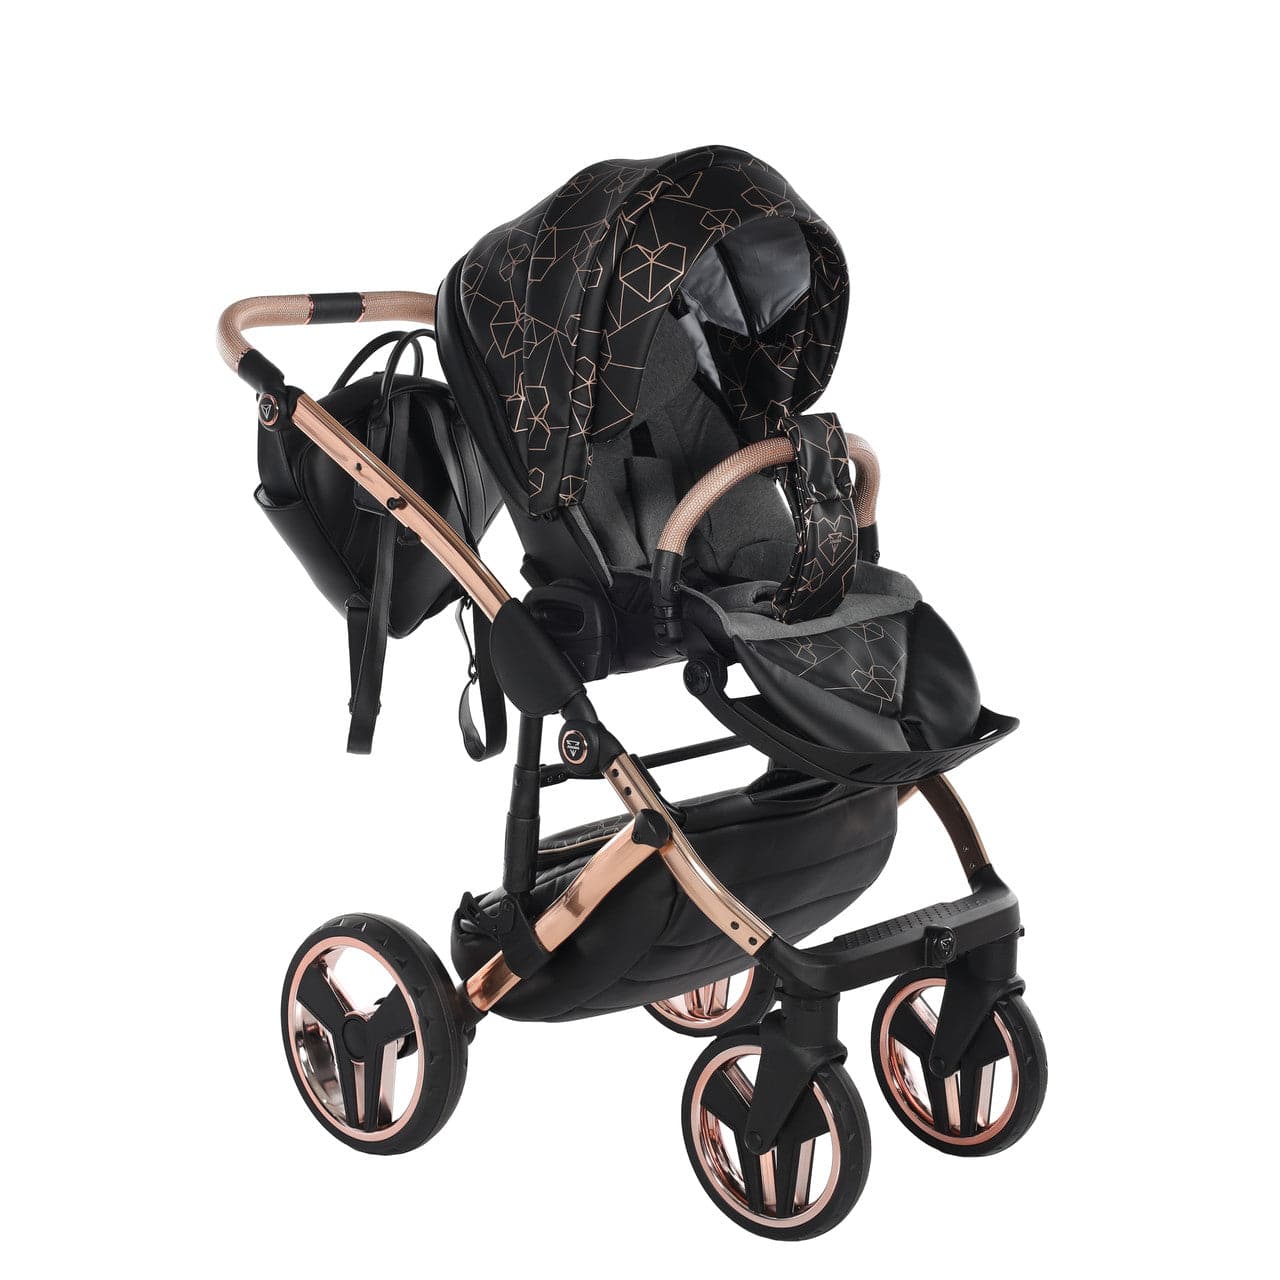 Junama Heart 3 In 1 Travel System - Black - For Your Little One